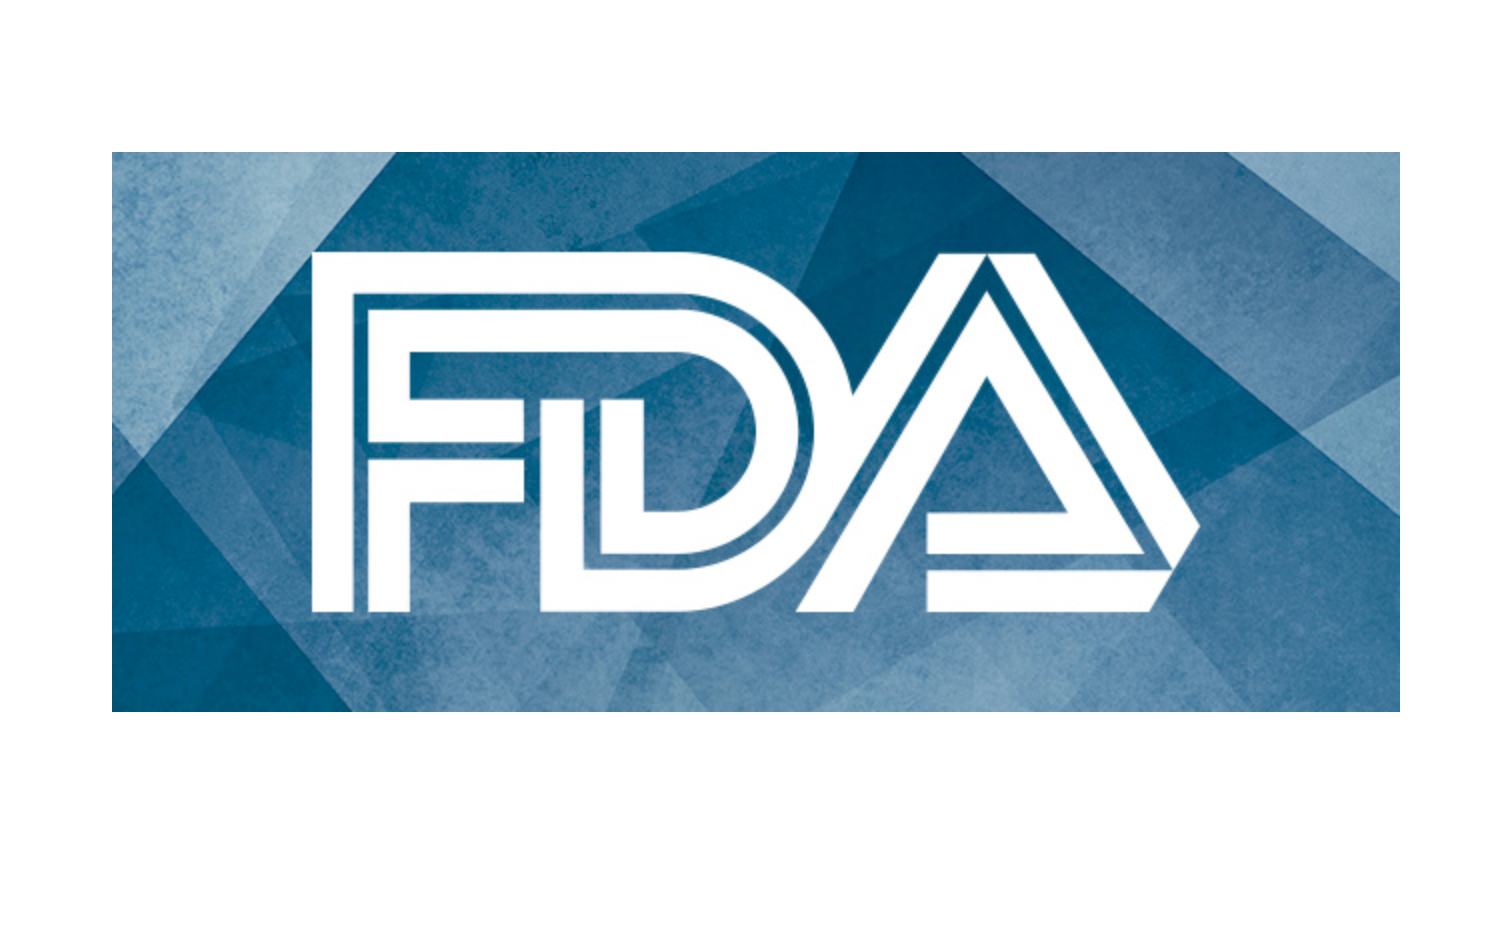 FDA Grants Elranatamab With Breakthrough Therapy Designation for Relapsed or Refractory Multiple Myeloma